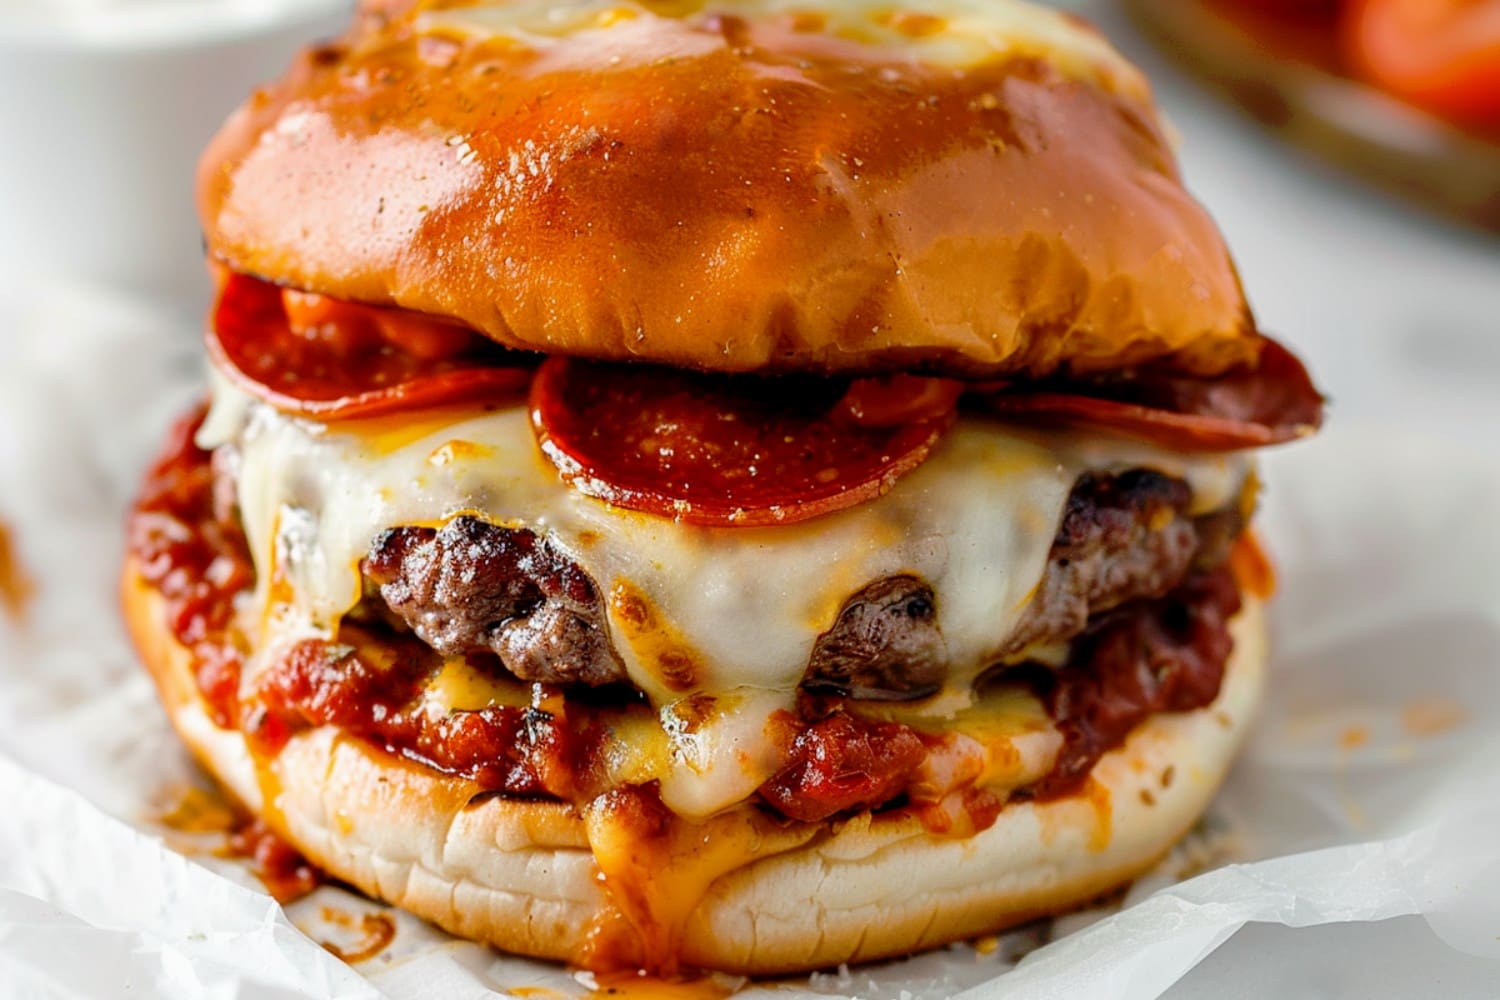 Mouthwatering pizza-inspired burgers pepperoni slices and cheese, served on a bun